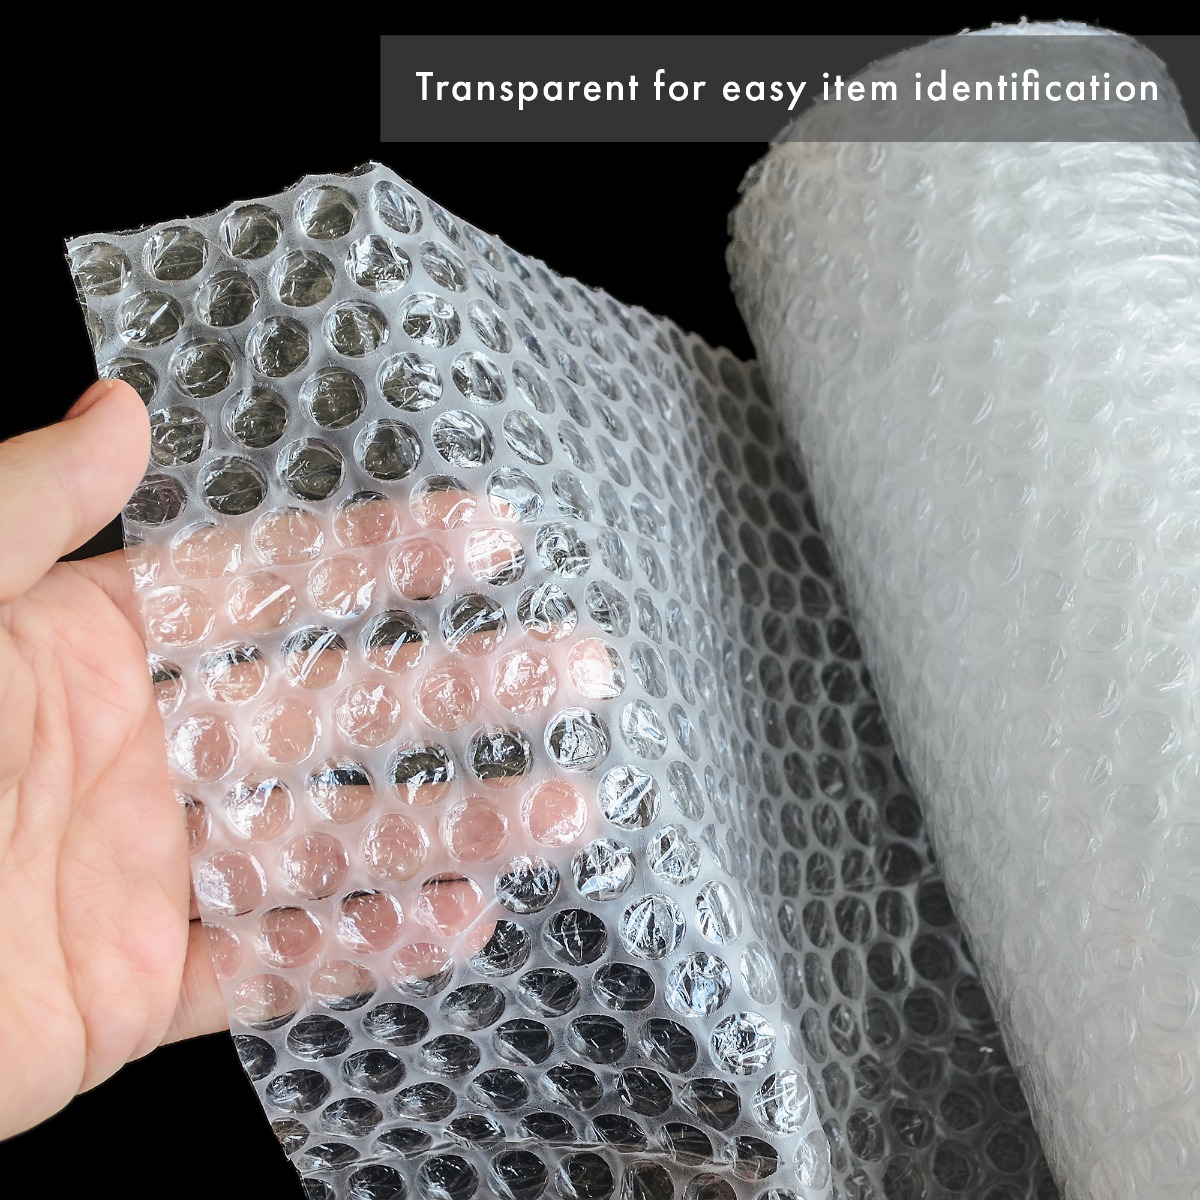 Protective Bubble Wrap 300mm x 50m - Pukka Post & Packaging